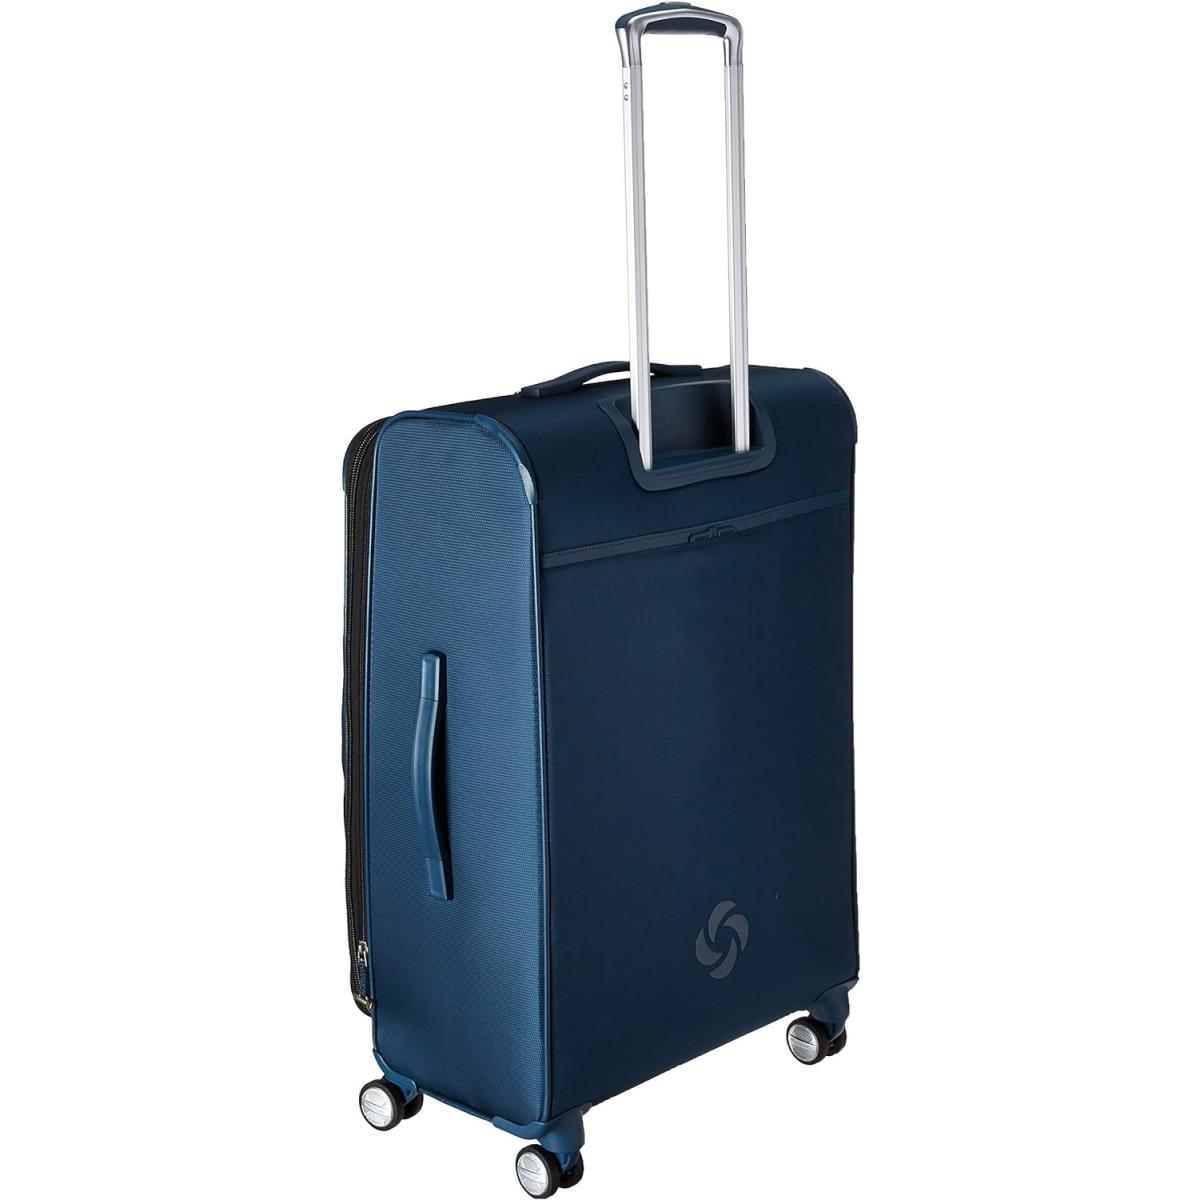 Samsonite Solyte Dlx Softside Expandable Luggage with Spinner Wheels Mediterranean Blue